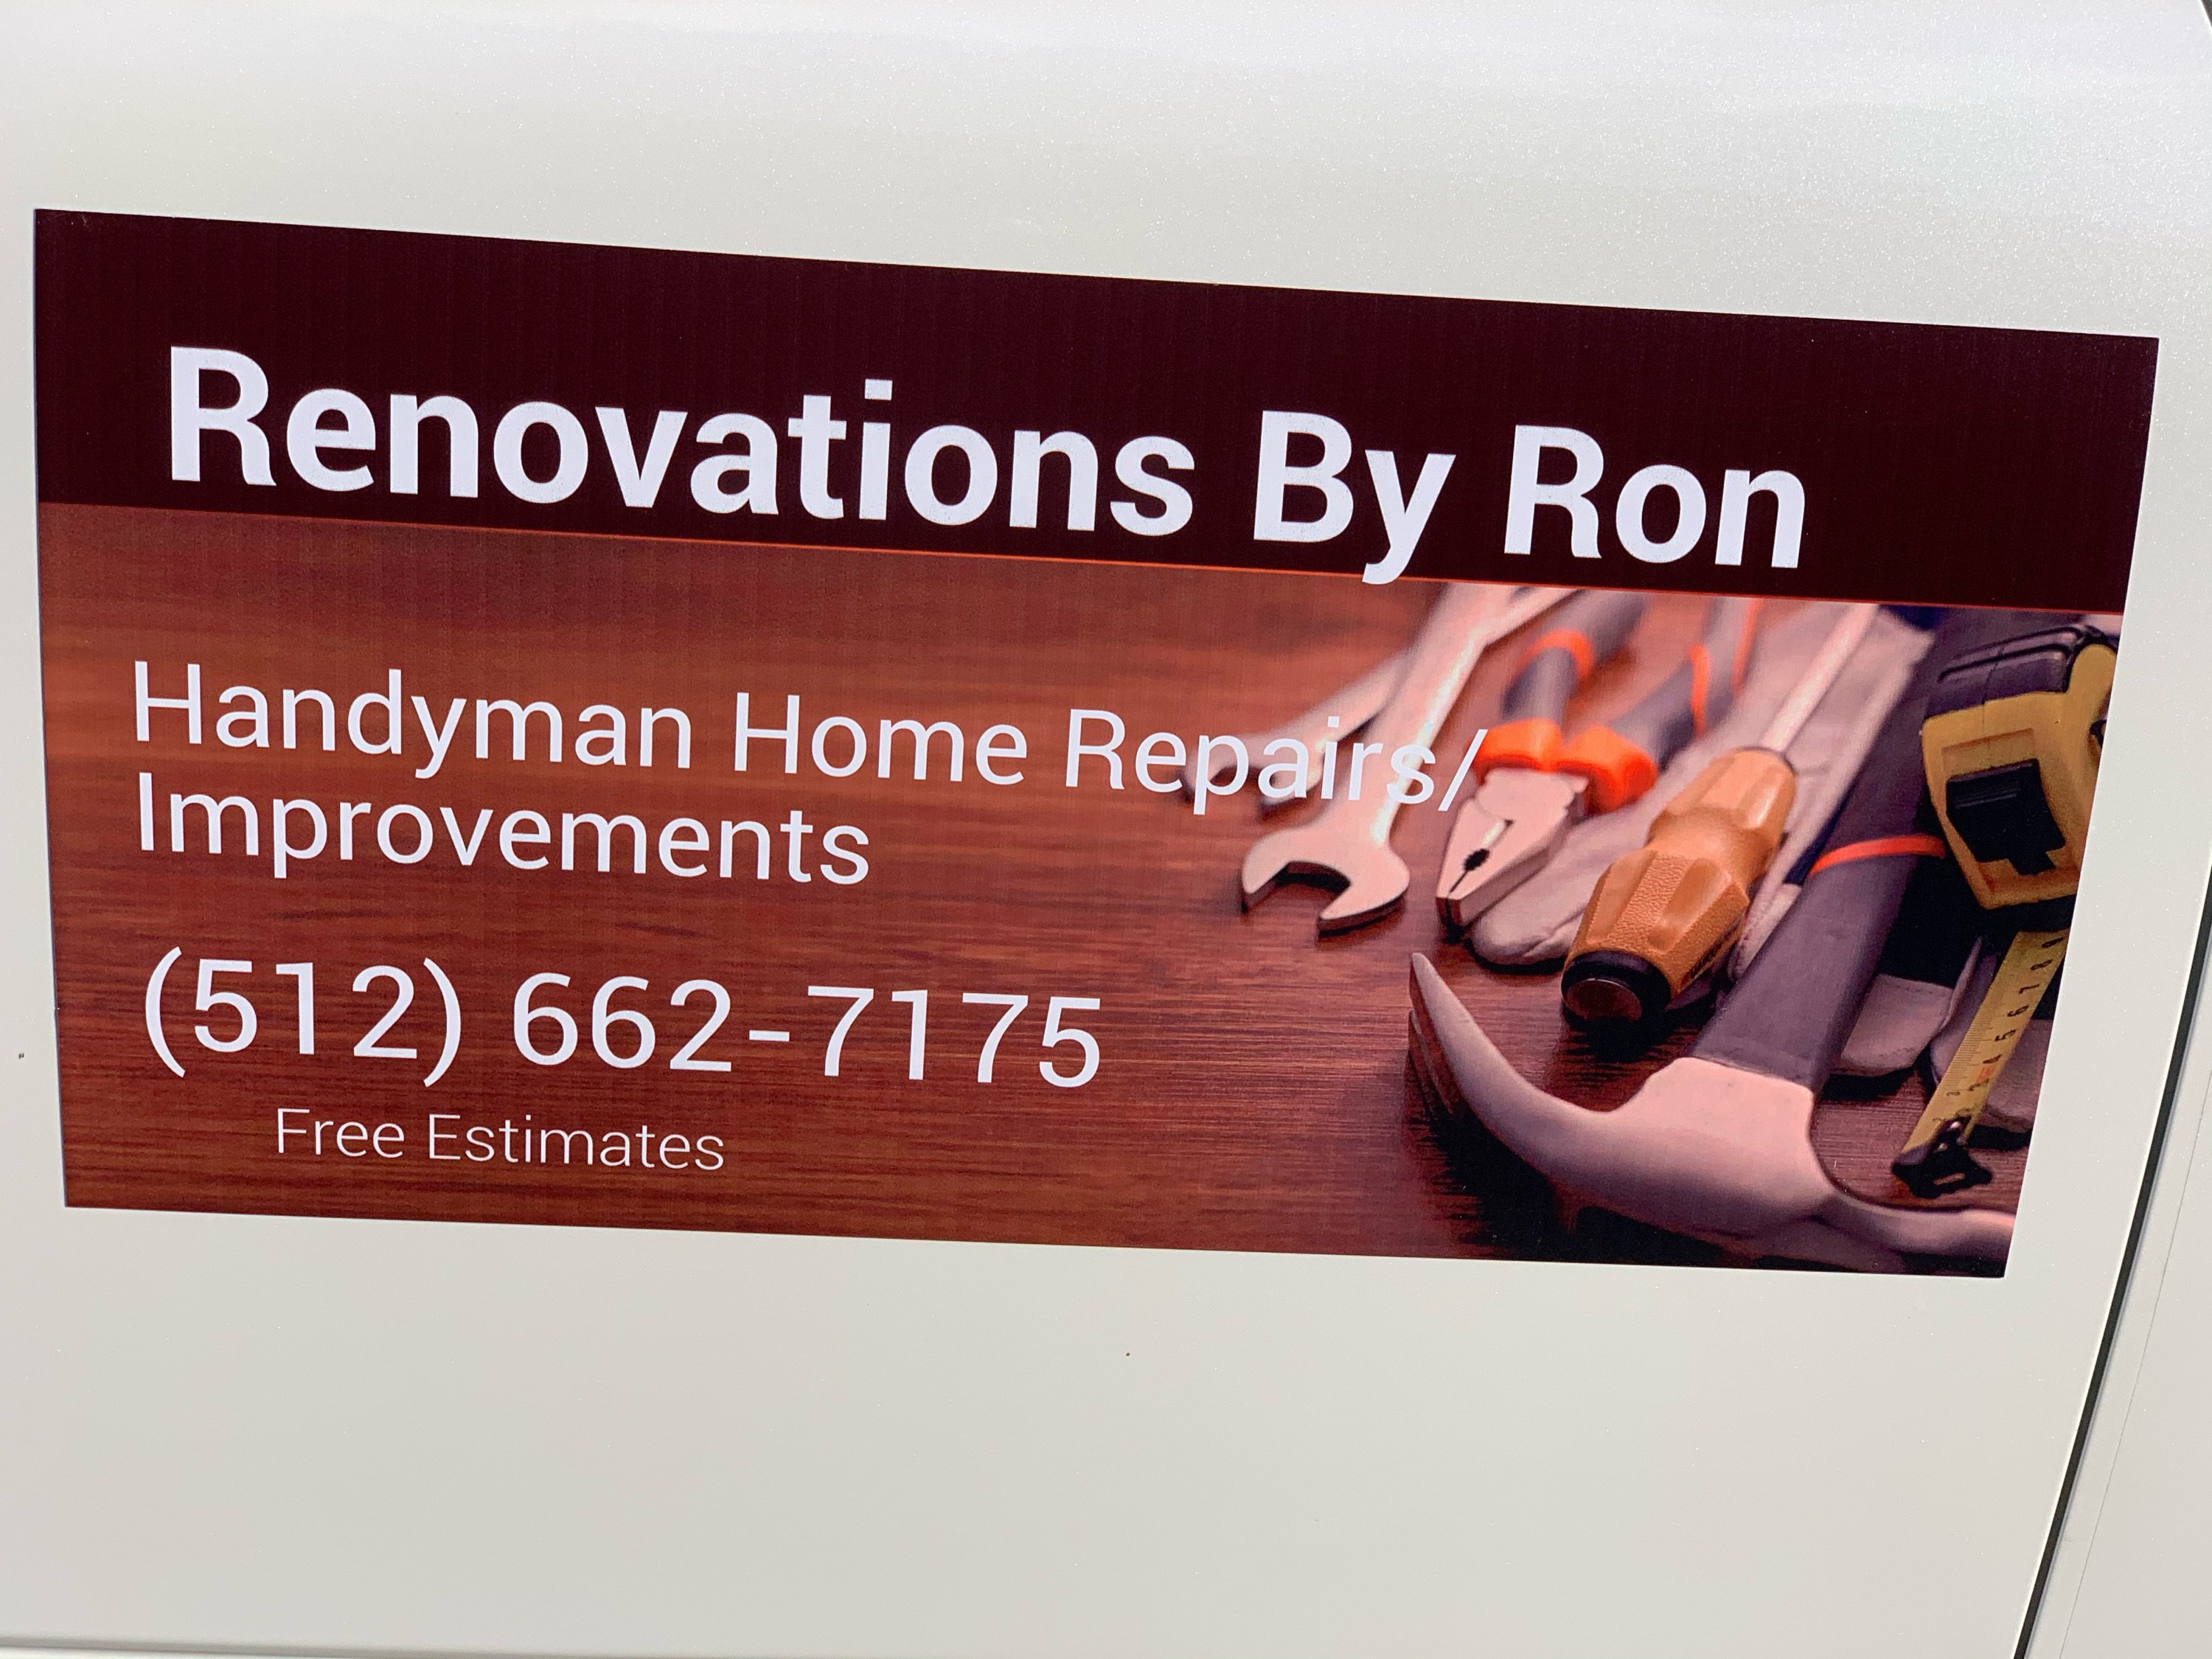 Renovations by Ron Logo